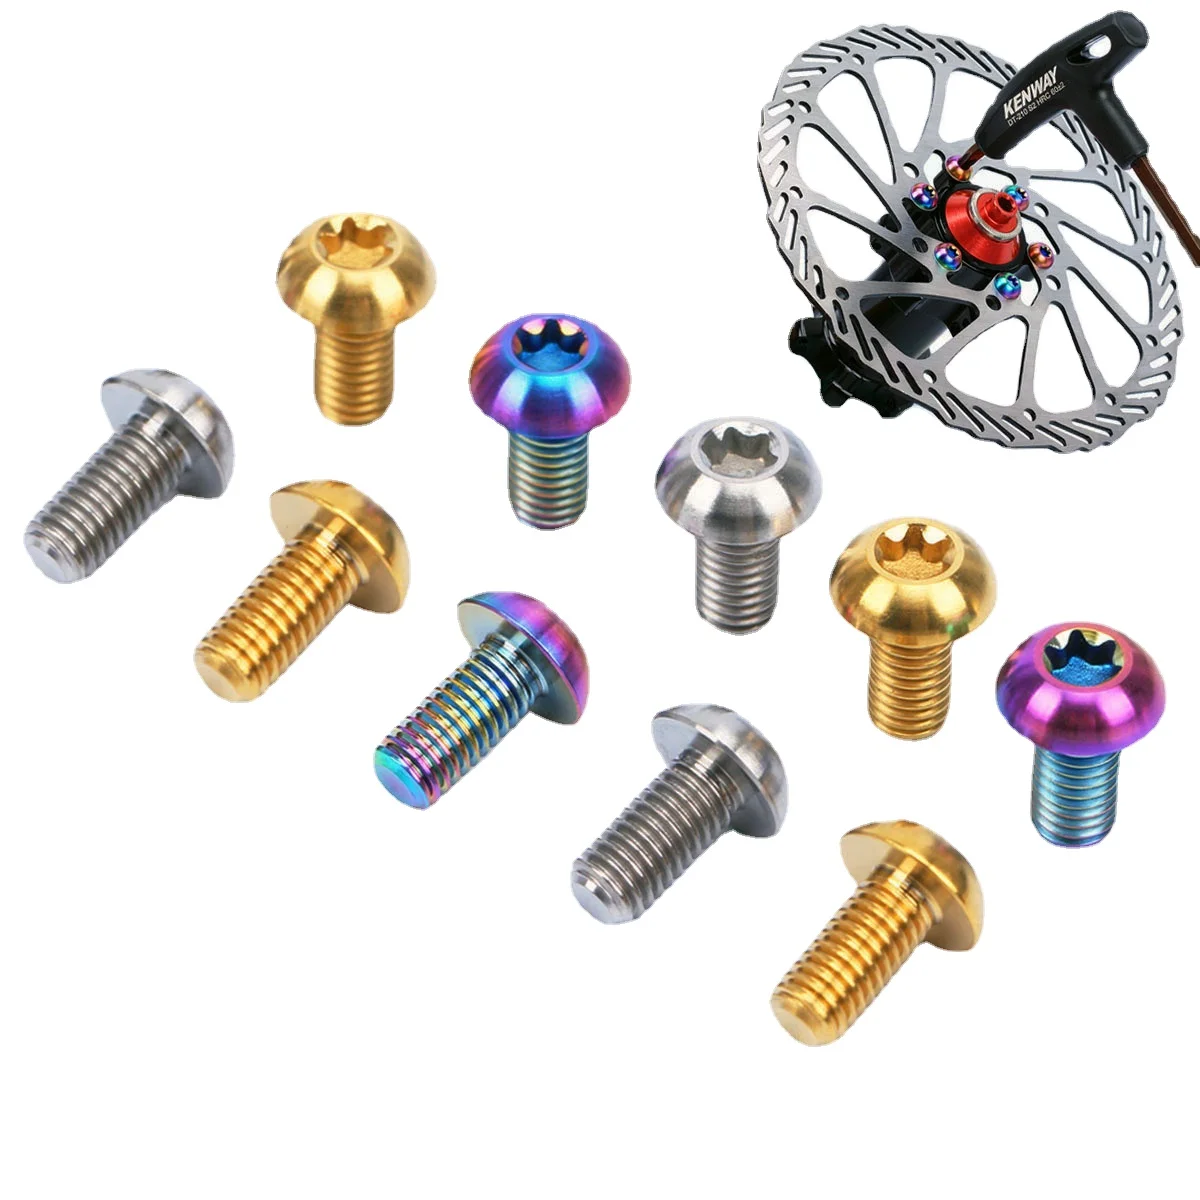 For Disc Brakes/Rotor Bolts NEW Set of 5 Avid/SRAM Torx T-25 & T-10 L-Wrenches 